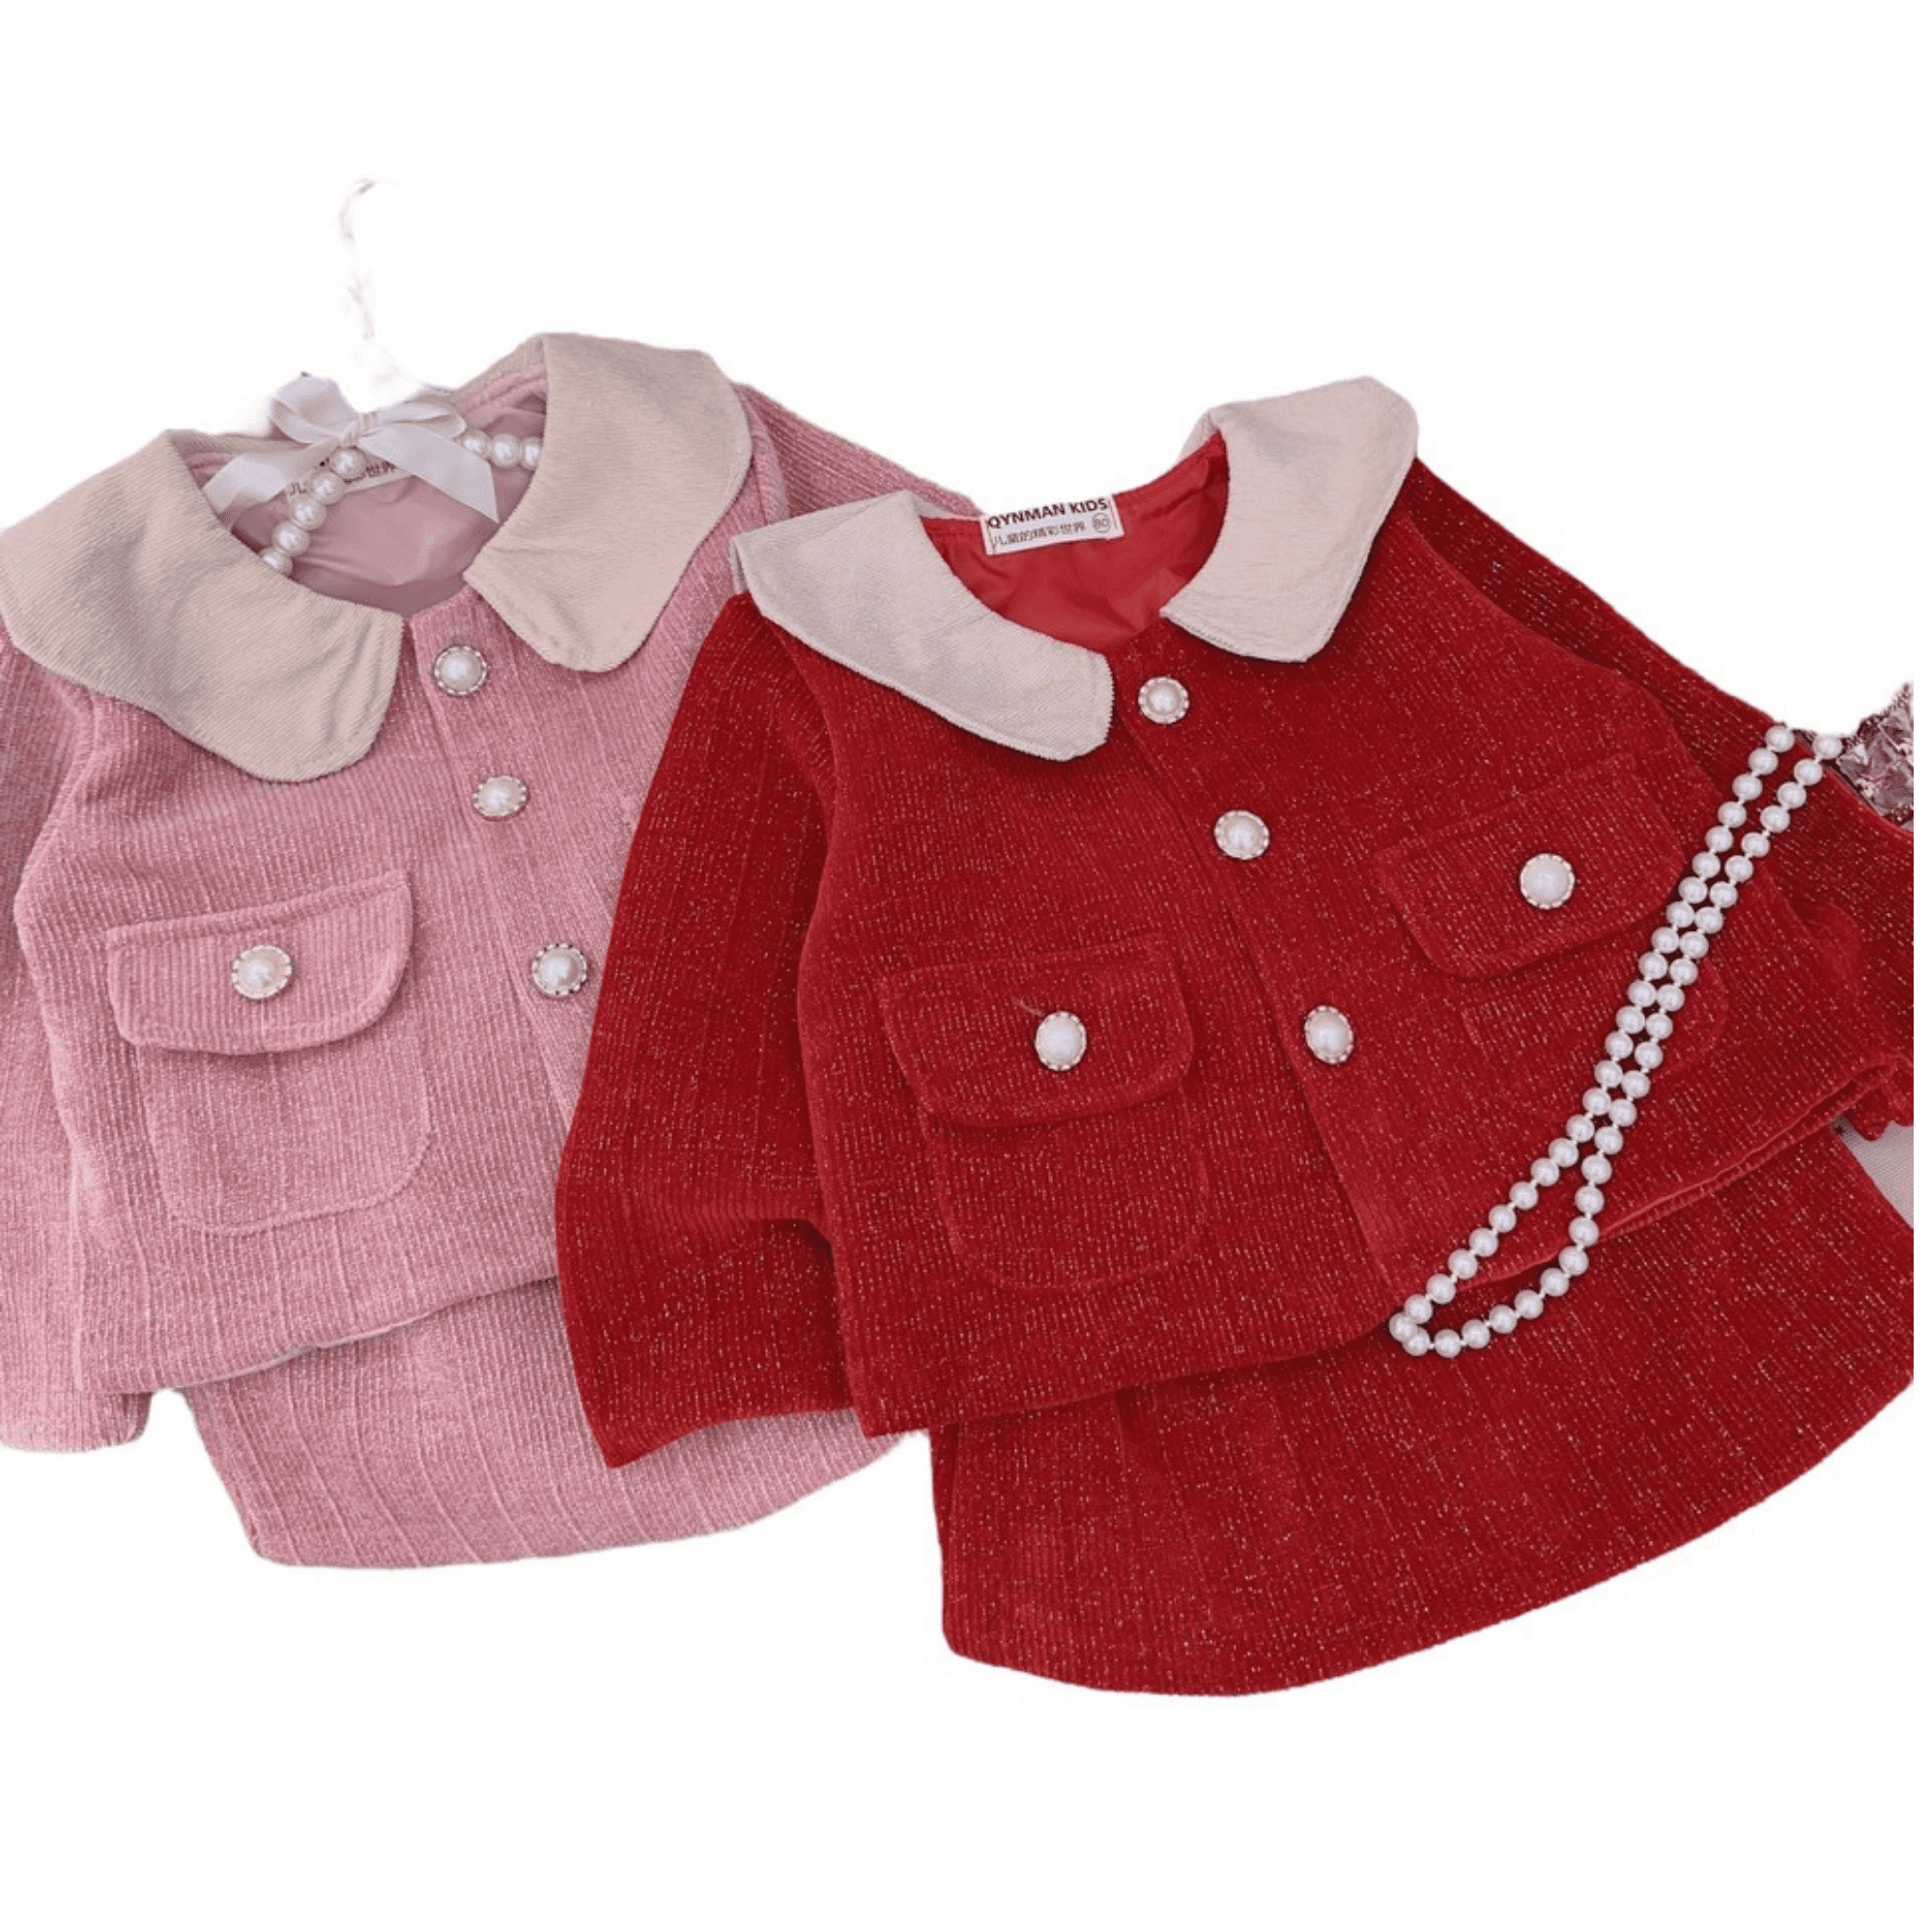 Winter Clothes For Kids Competitive Price 100% Wool Dresses Casual Each One In Opp Bag Vietnam Manufacturer